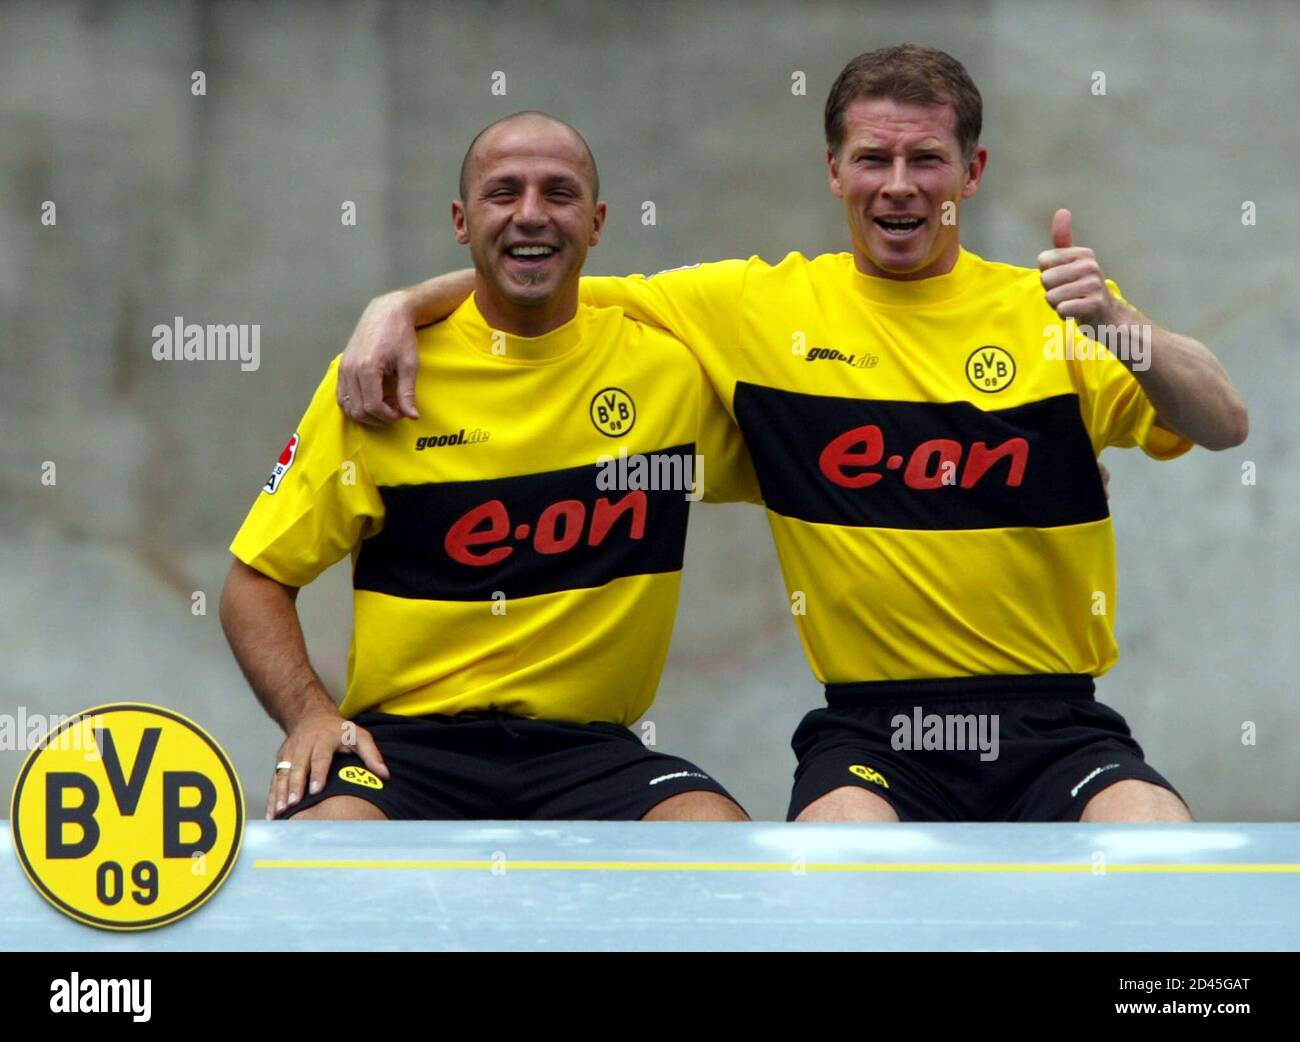 Borussia Dortmund's Giuseppe Reina (L) and Stefan Reuter (R) joke as they pose for photographers during the official team presentation in Dortmund July 5, 2002. Borussia Dortmund, which play in the German premier league won the German Championship in May 2002. REUTERS/Ina Fassbender  INA/FAB Stock Photo